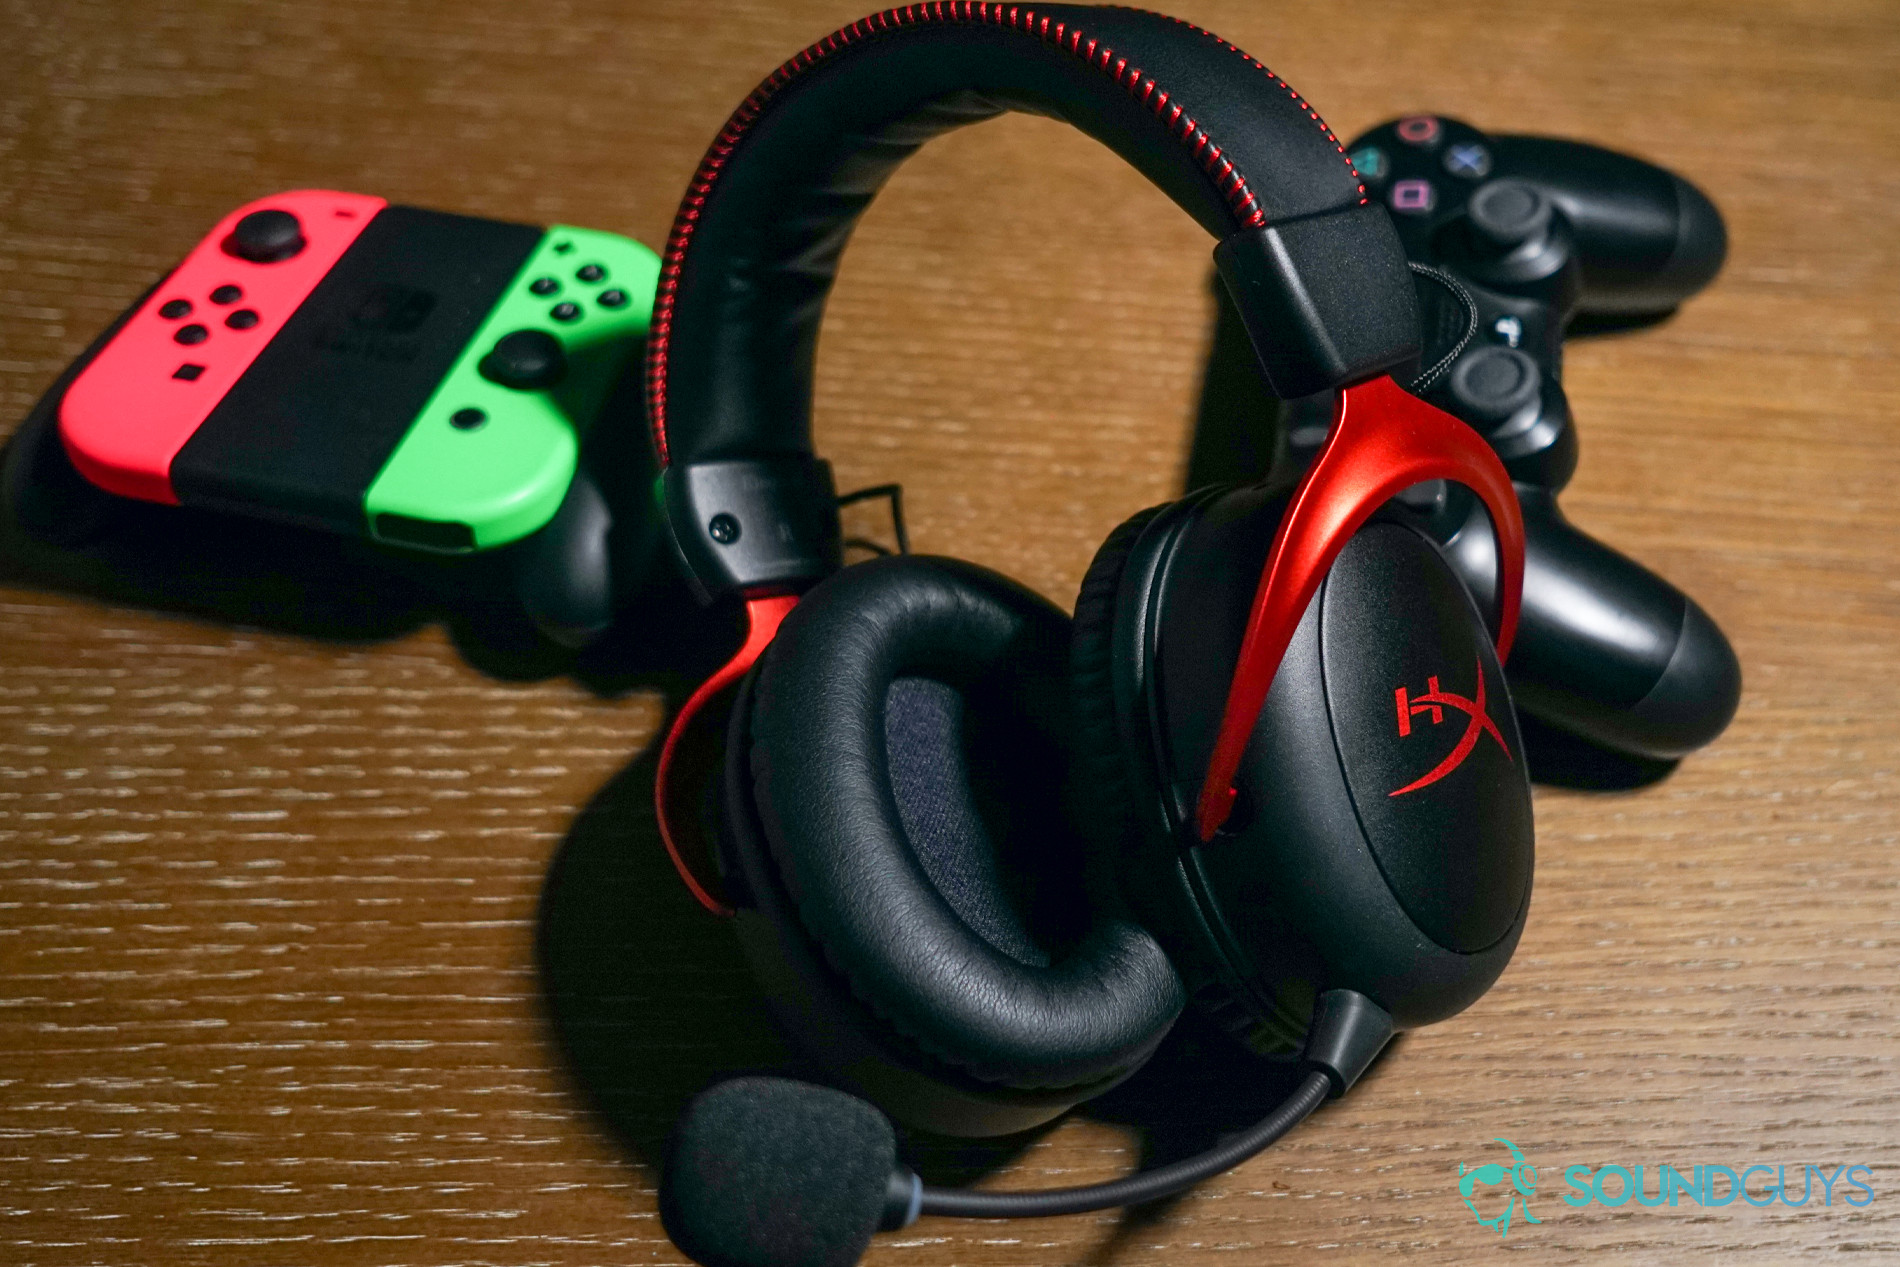 The HyperX Cloud II Wireless lays on a wooden table in front of a PlayStation 4 controller and Nintendo Switch Joy Cons.